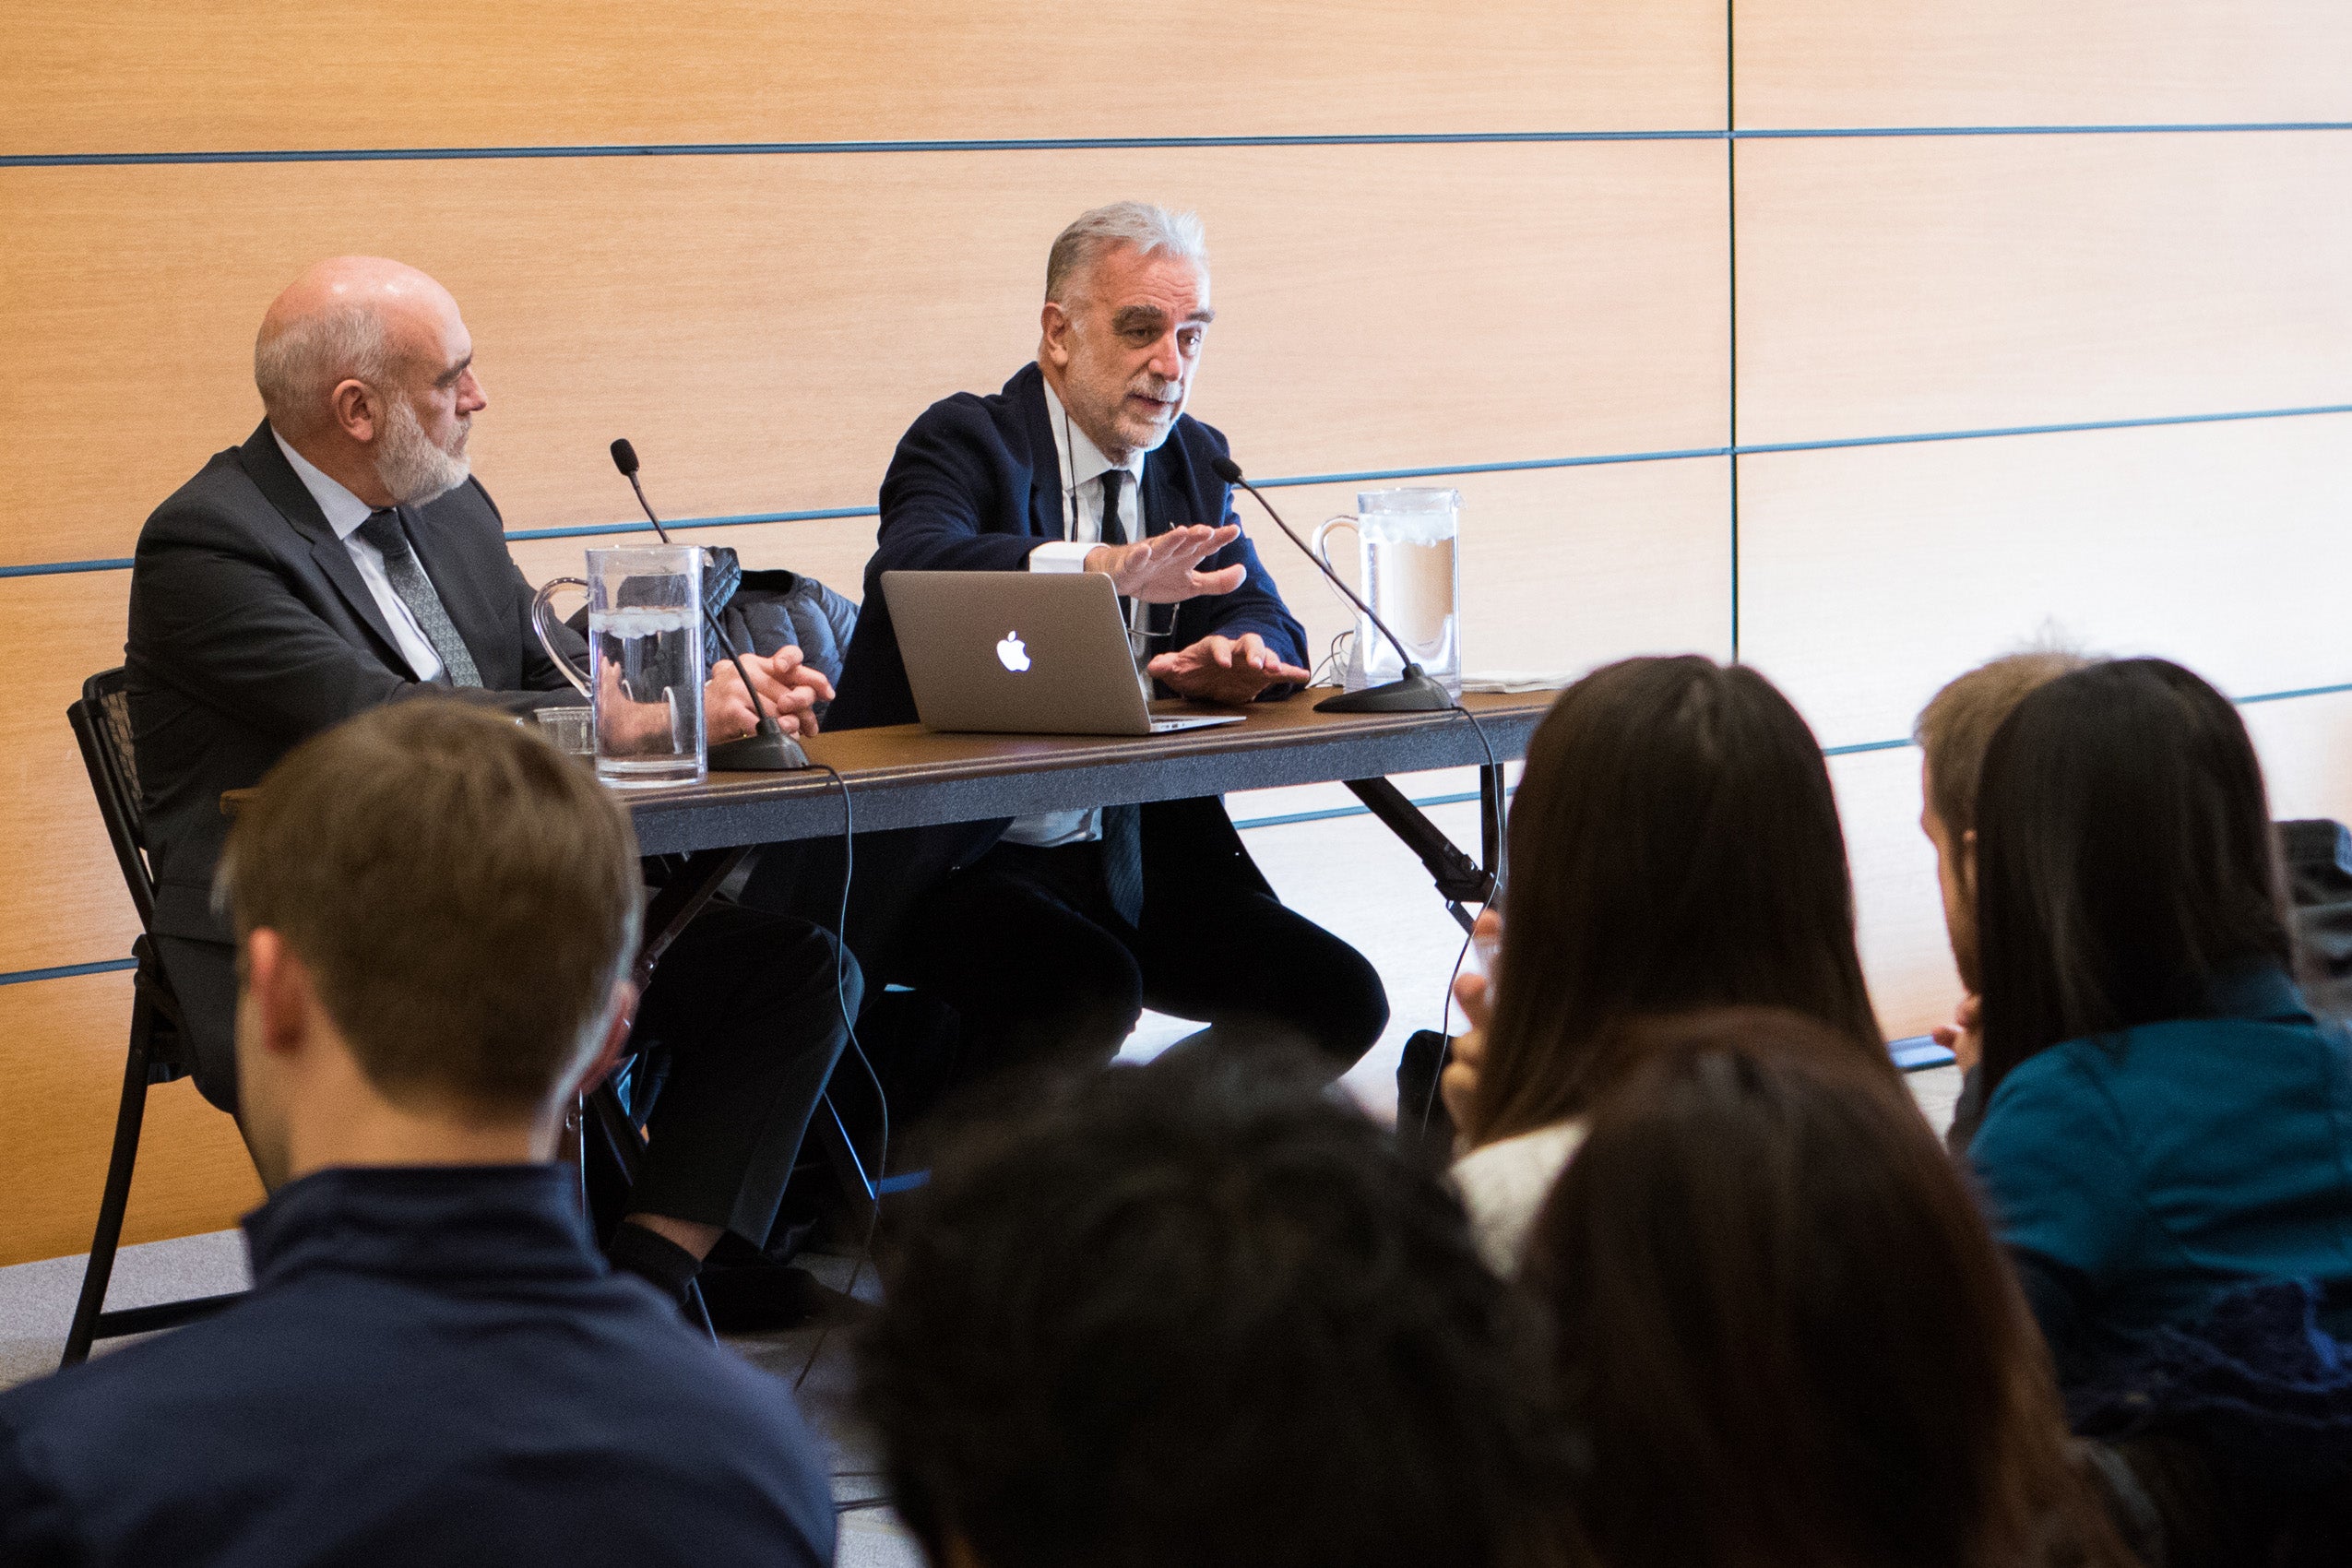 Luis Moreno-Ocampo and Tim McCormack speaking at a table with microphones, in front of an audience